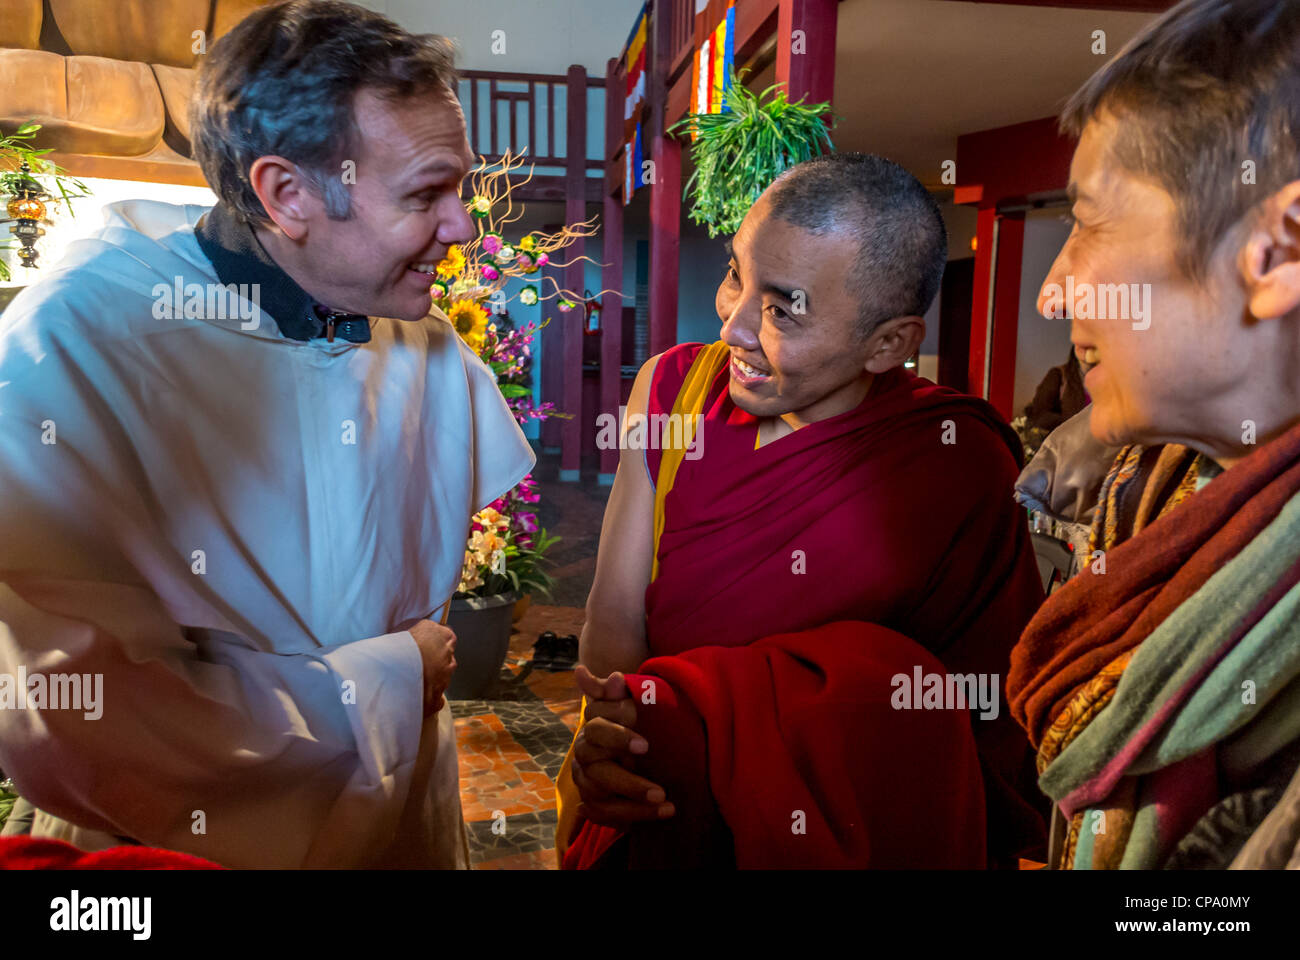 Paris, France, Interfaith Buddhist Festival, Meeting French Protestant Priest and Nun, Temple, religious meeting, different cultures religion, interfaith discussion Stock Photo